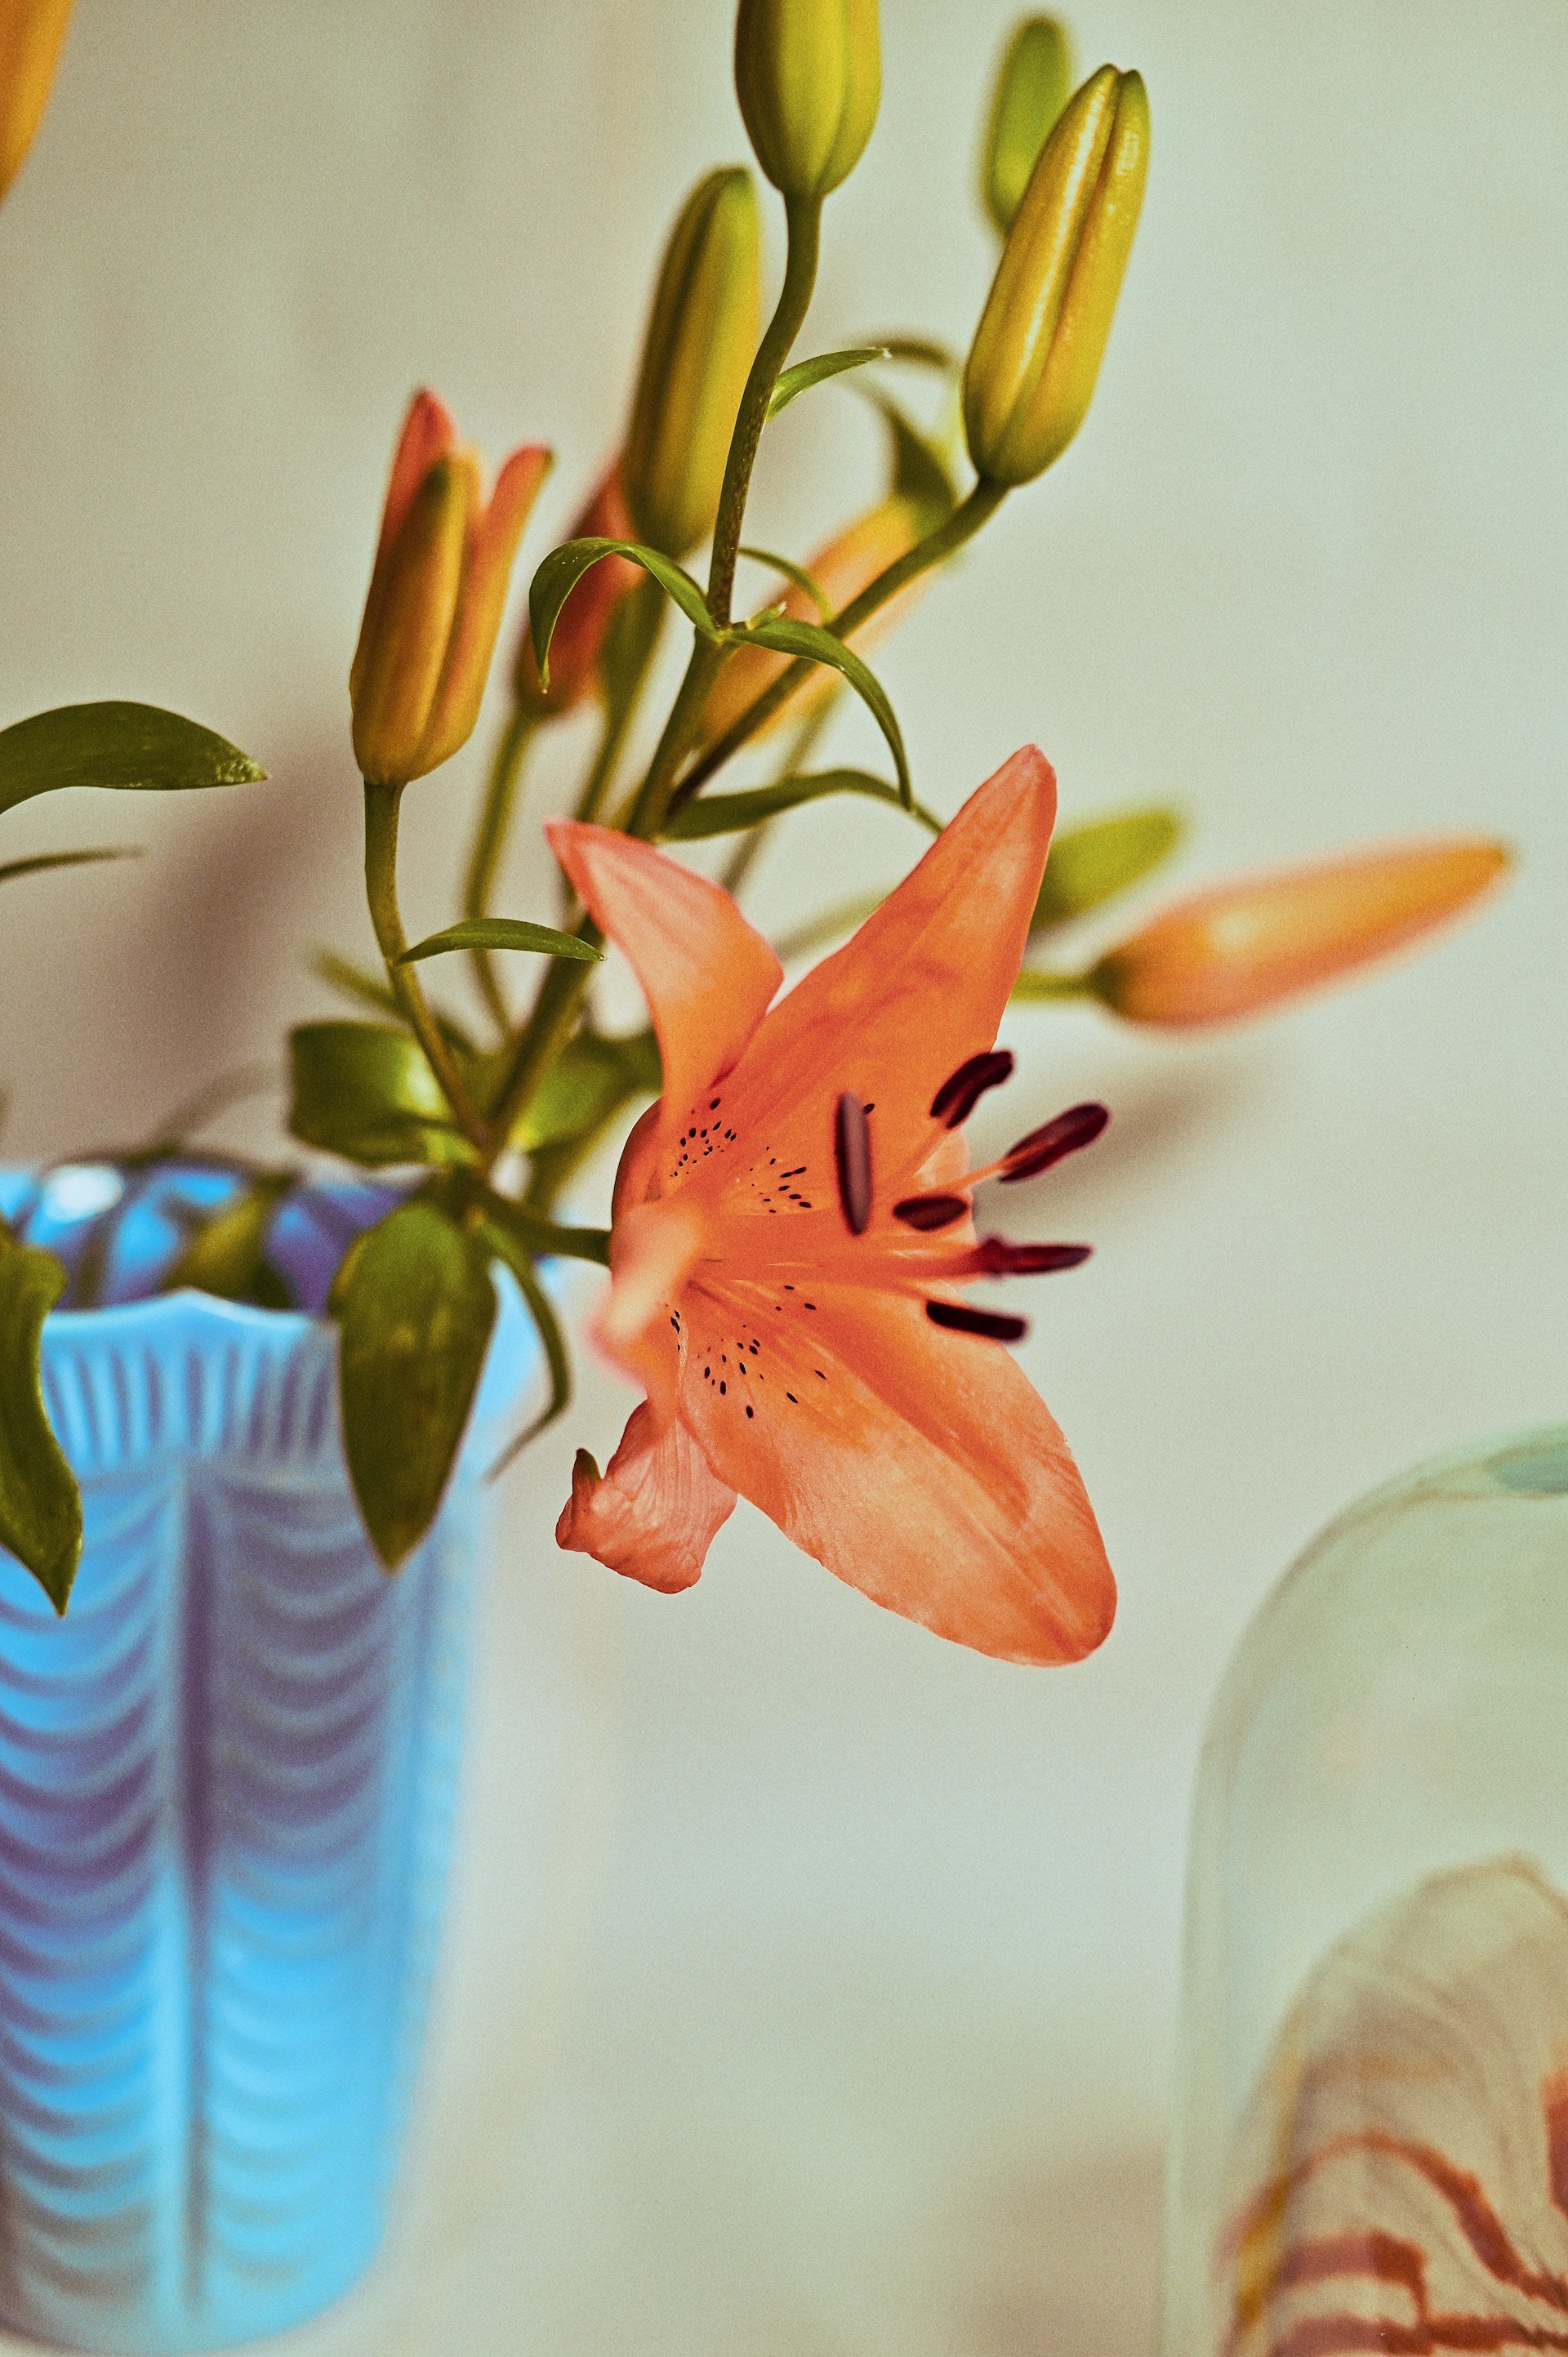 A blue vase on a table with orange flowers in it.